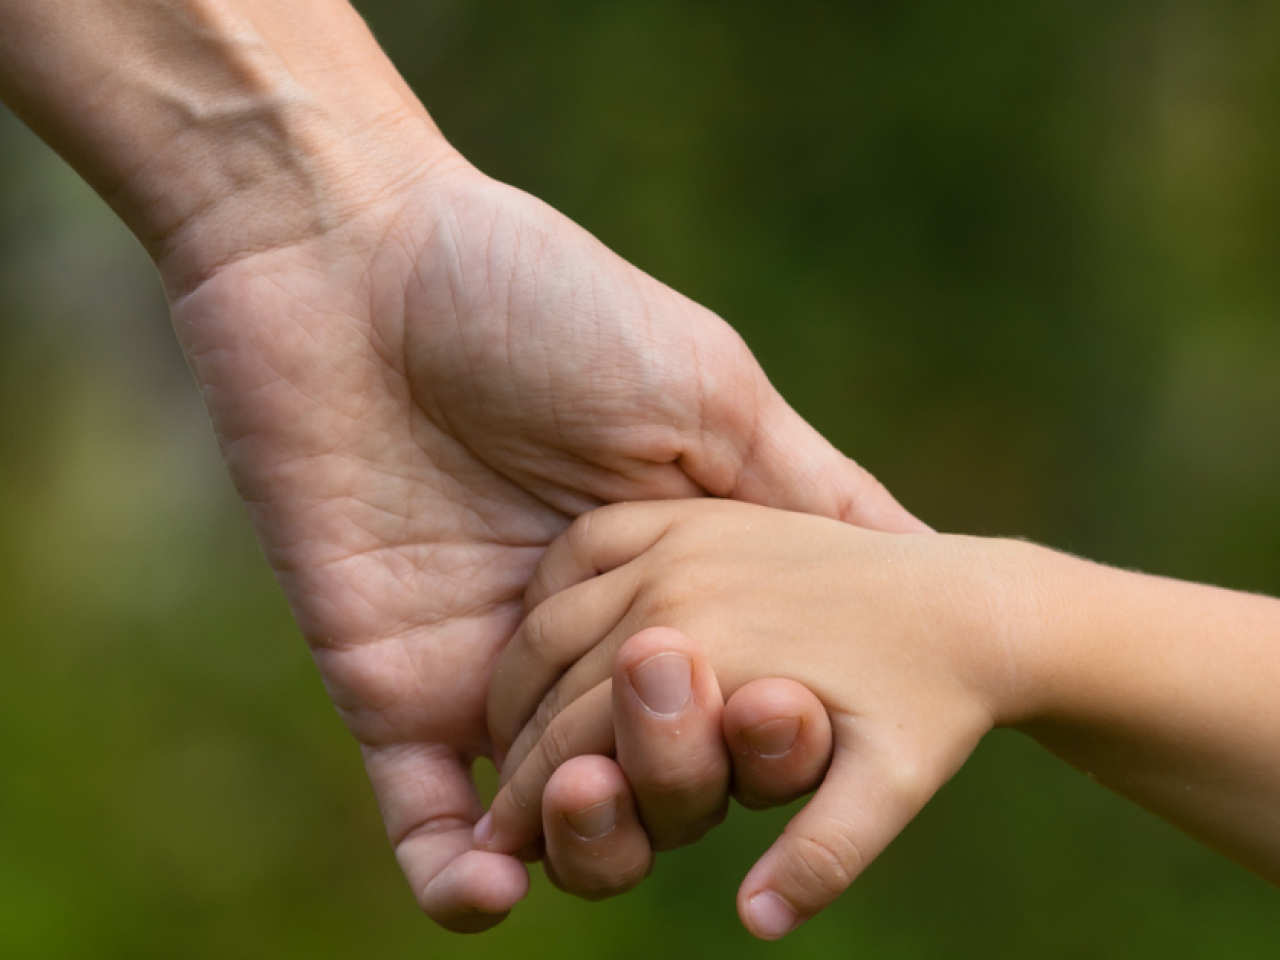 A child holding an adult's hand